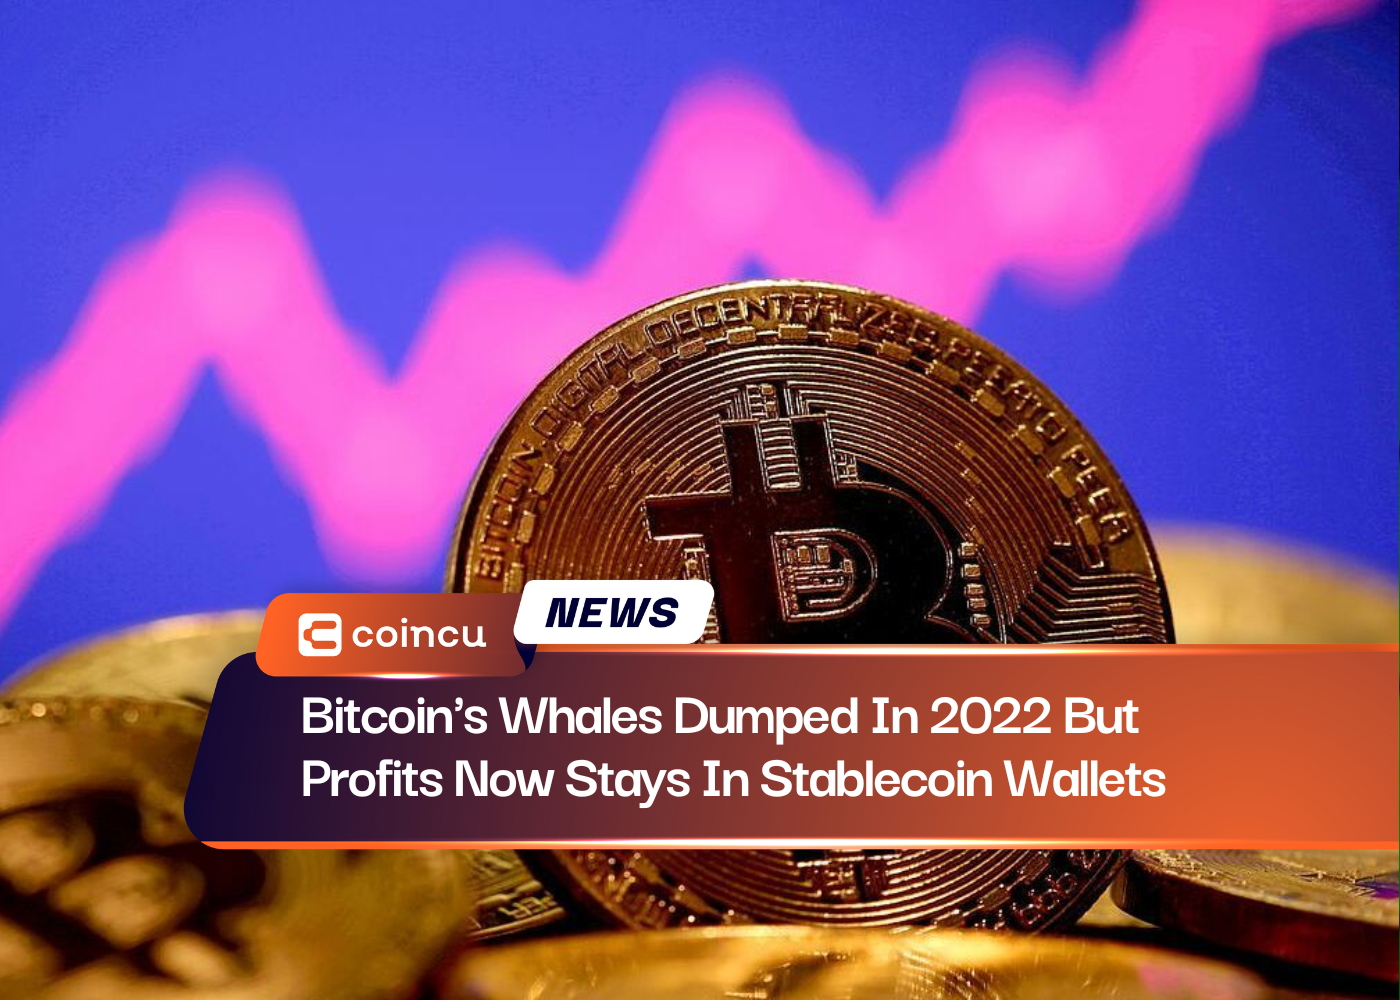 Bitcoin's Whales Dumped In 2022 But Profits Now Stays In Stablecoin Wallets